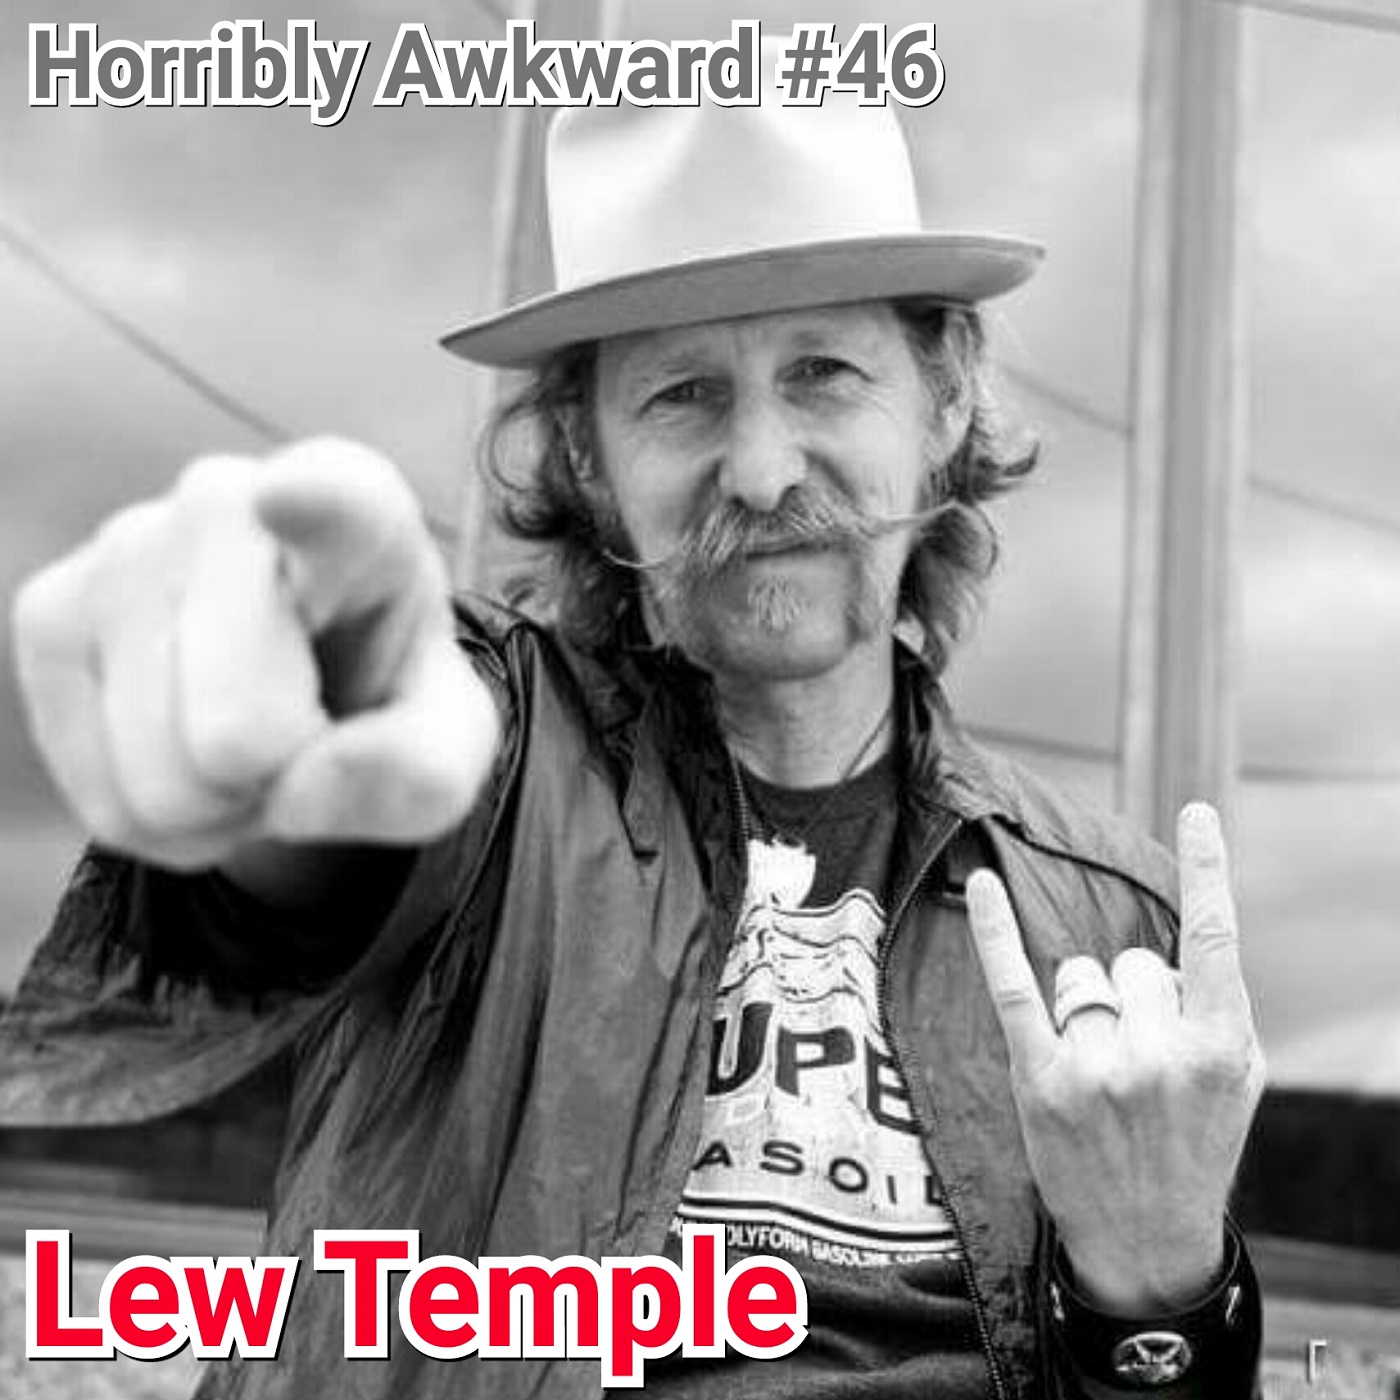 #46| Lew Temple (The Walking Dead, Rob Zombies "31", The Devils Rejects, The Lone Ranger)